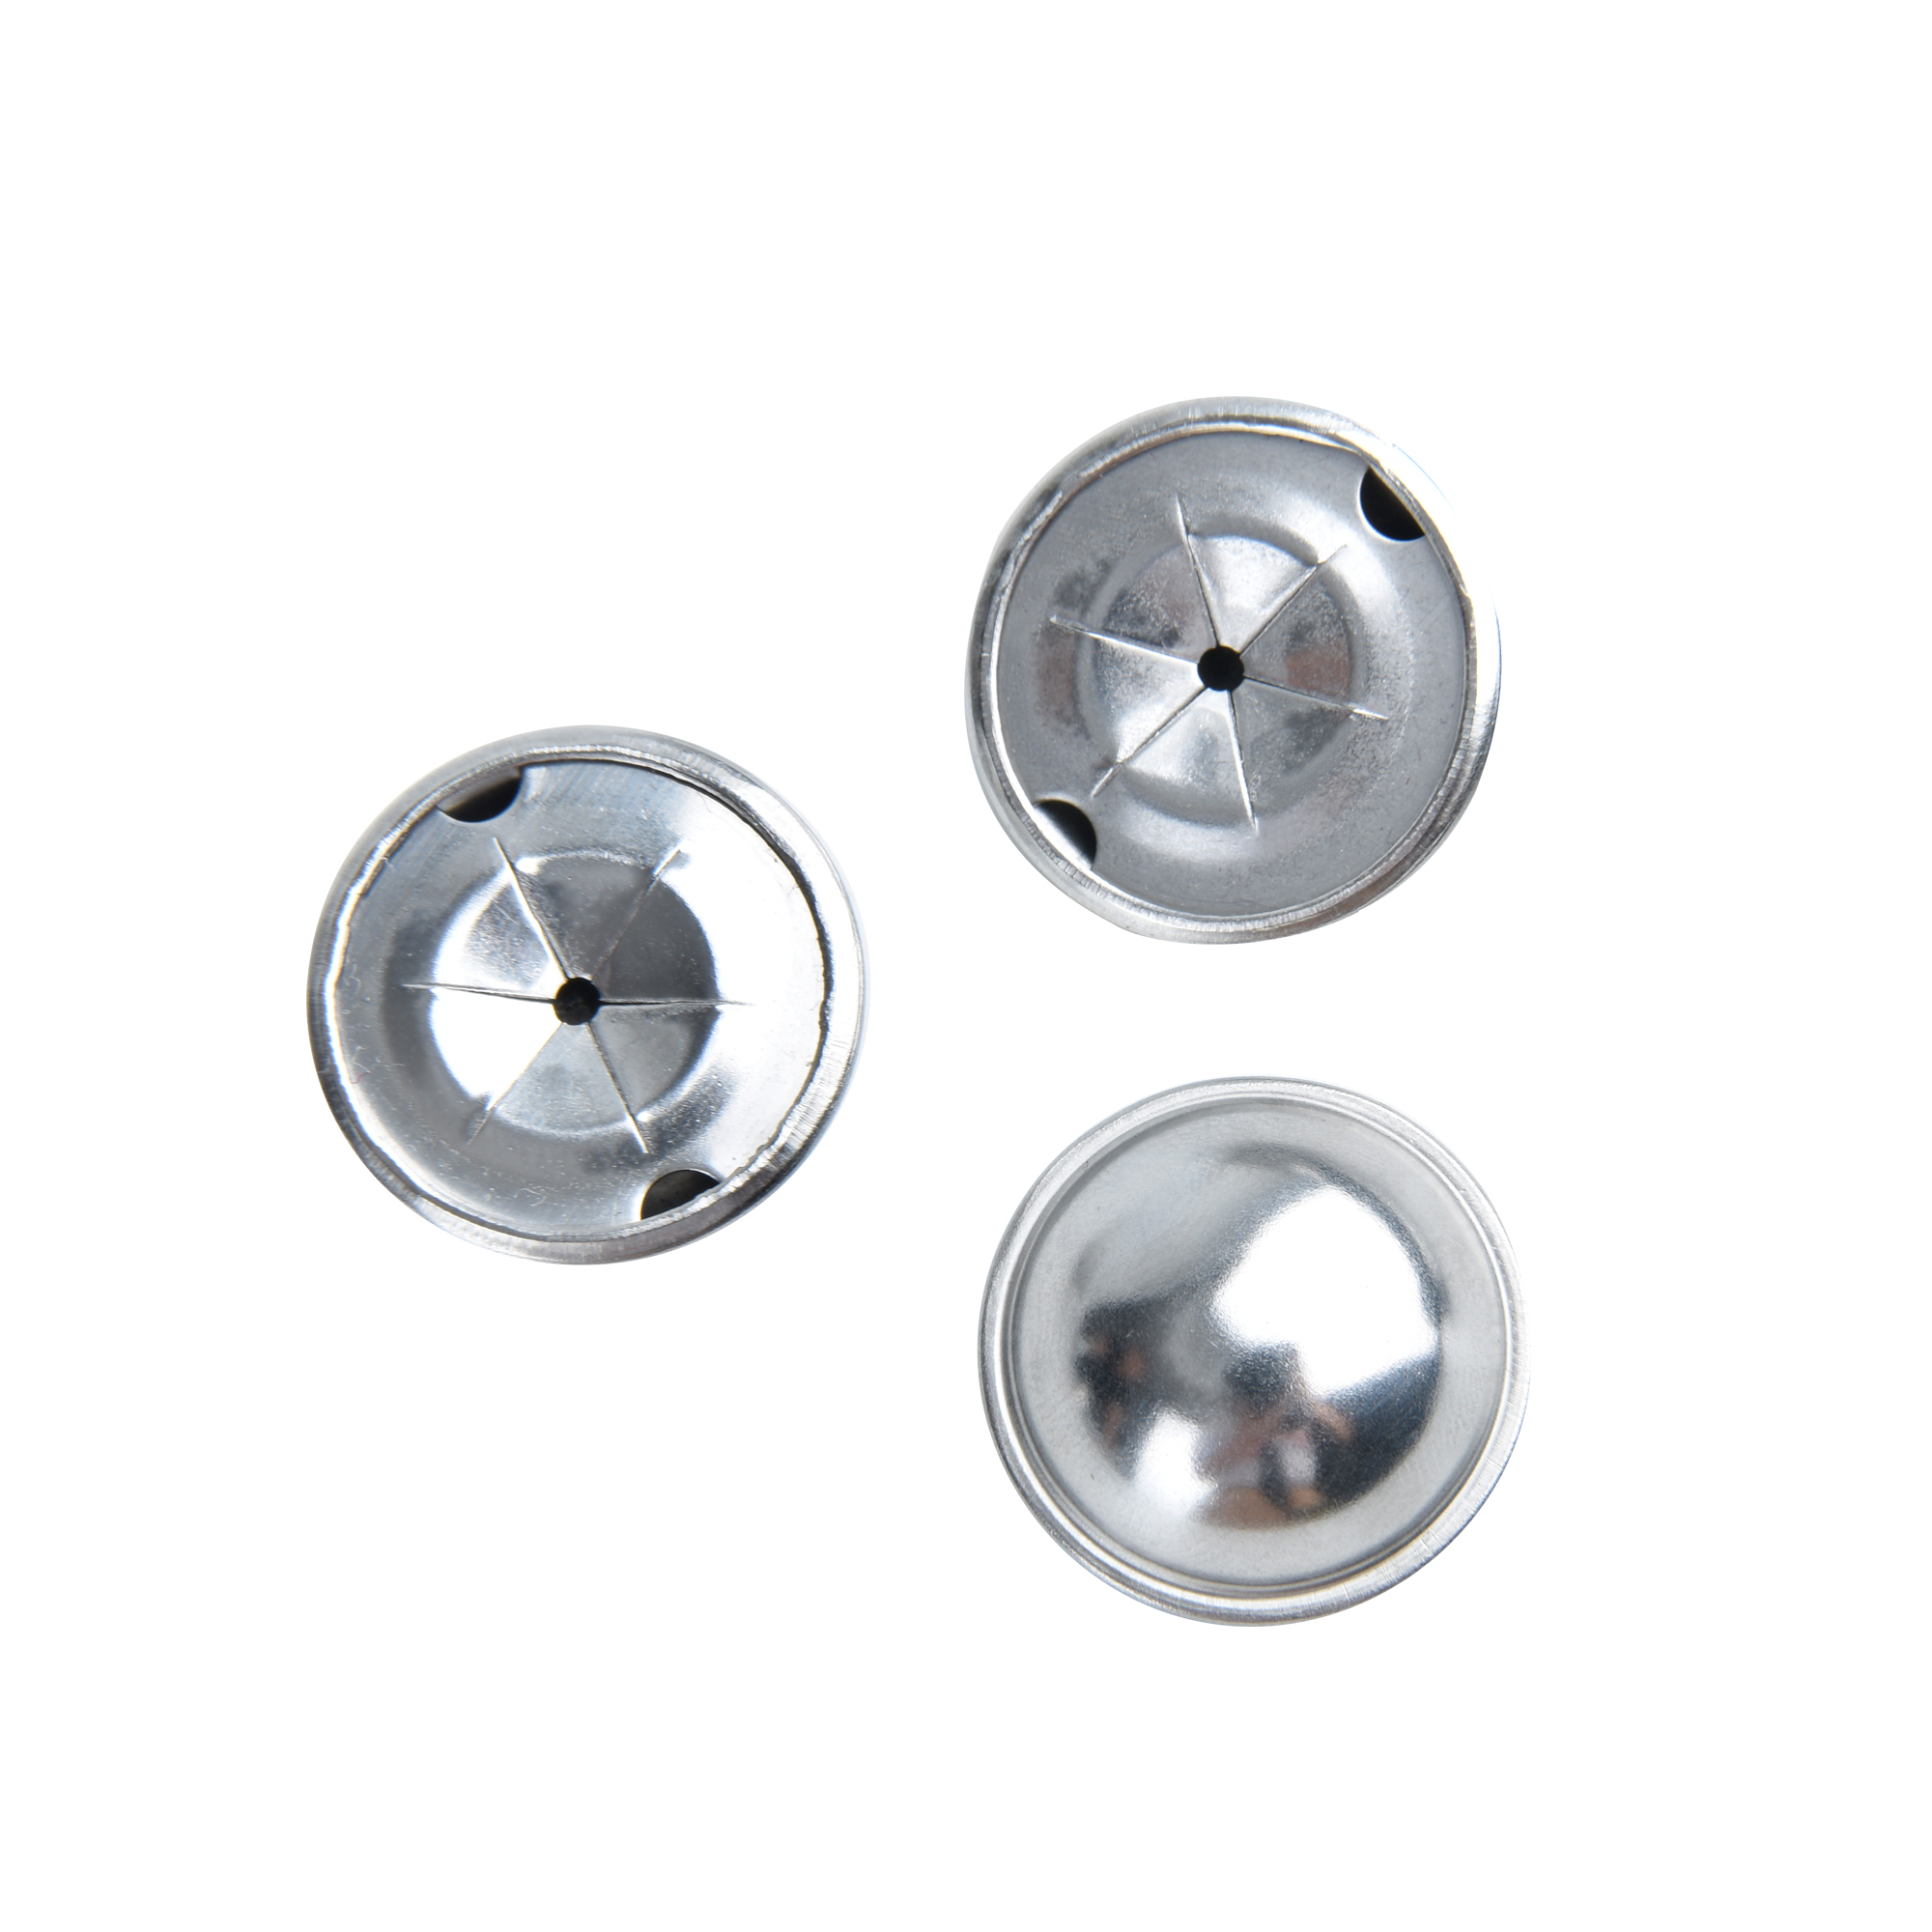 /?products/Lacing_Anchors/Stainless-Steel-Dome-Caps.html